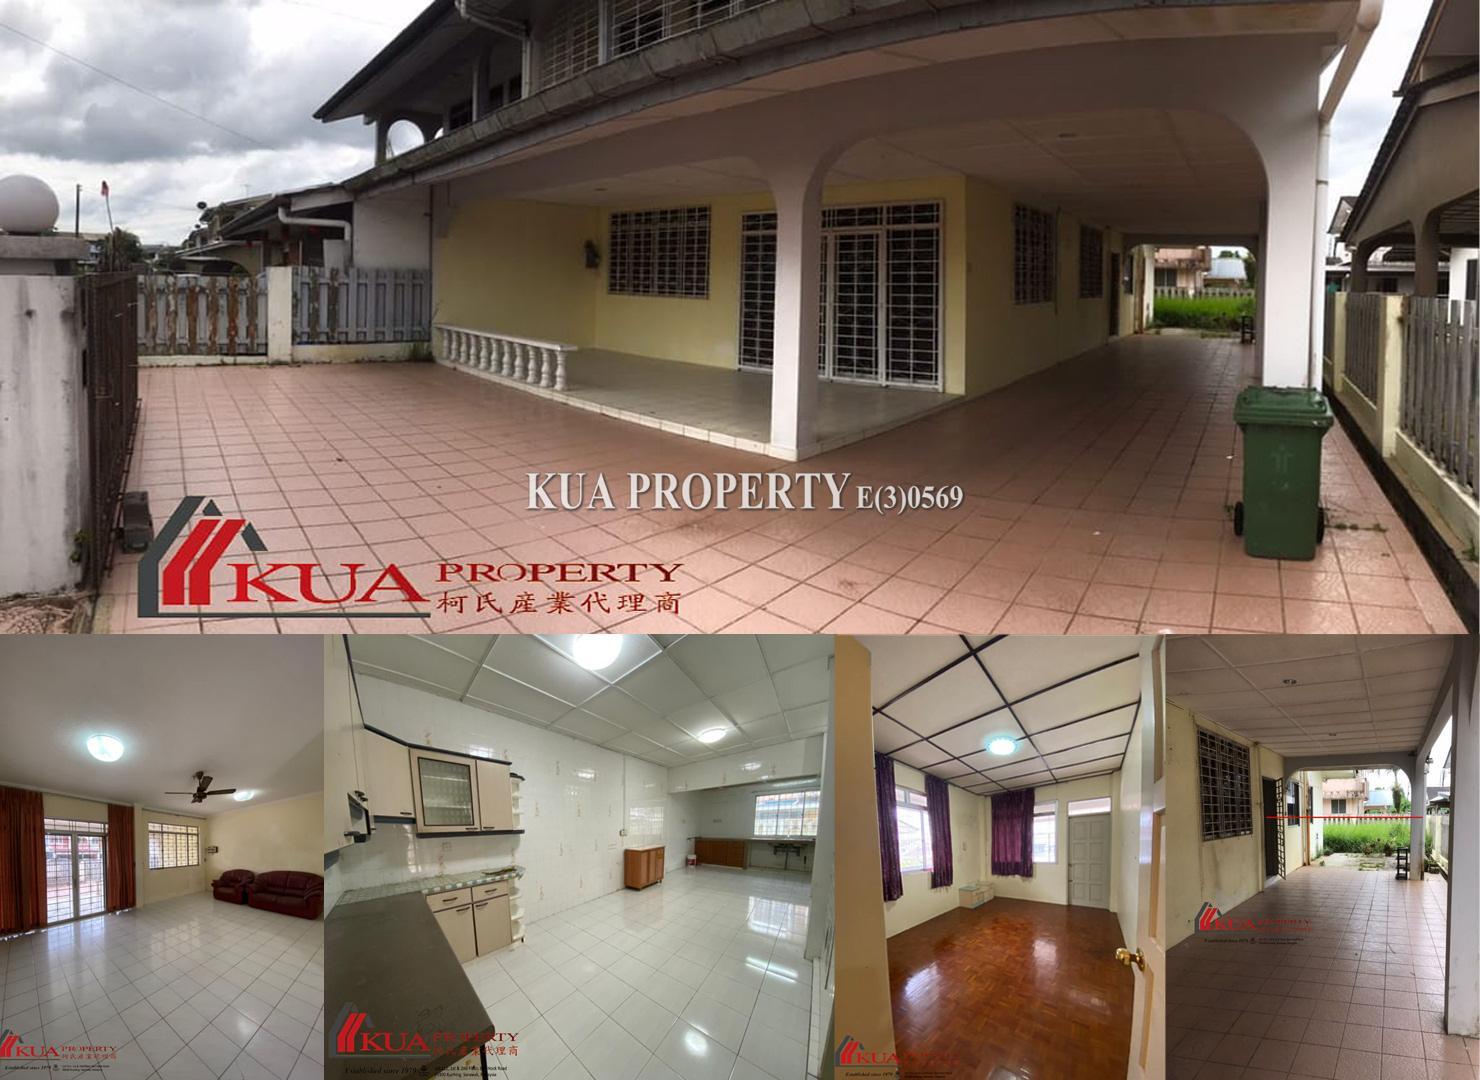 Double Storey Semi-Detached House For Sale!! at Lorong Kapor, Taman Wee & Wee